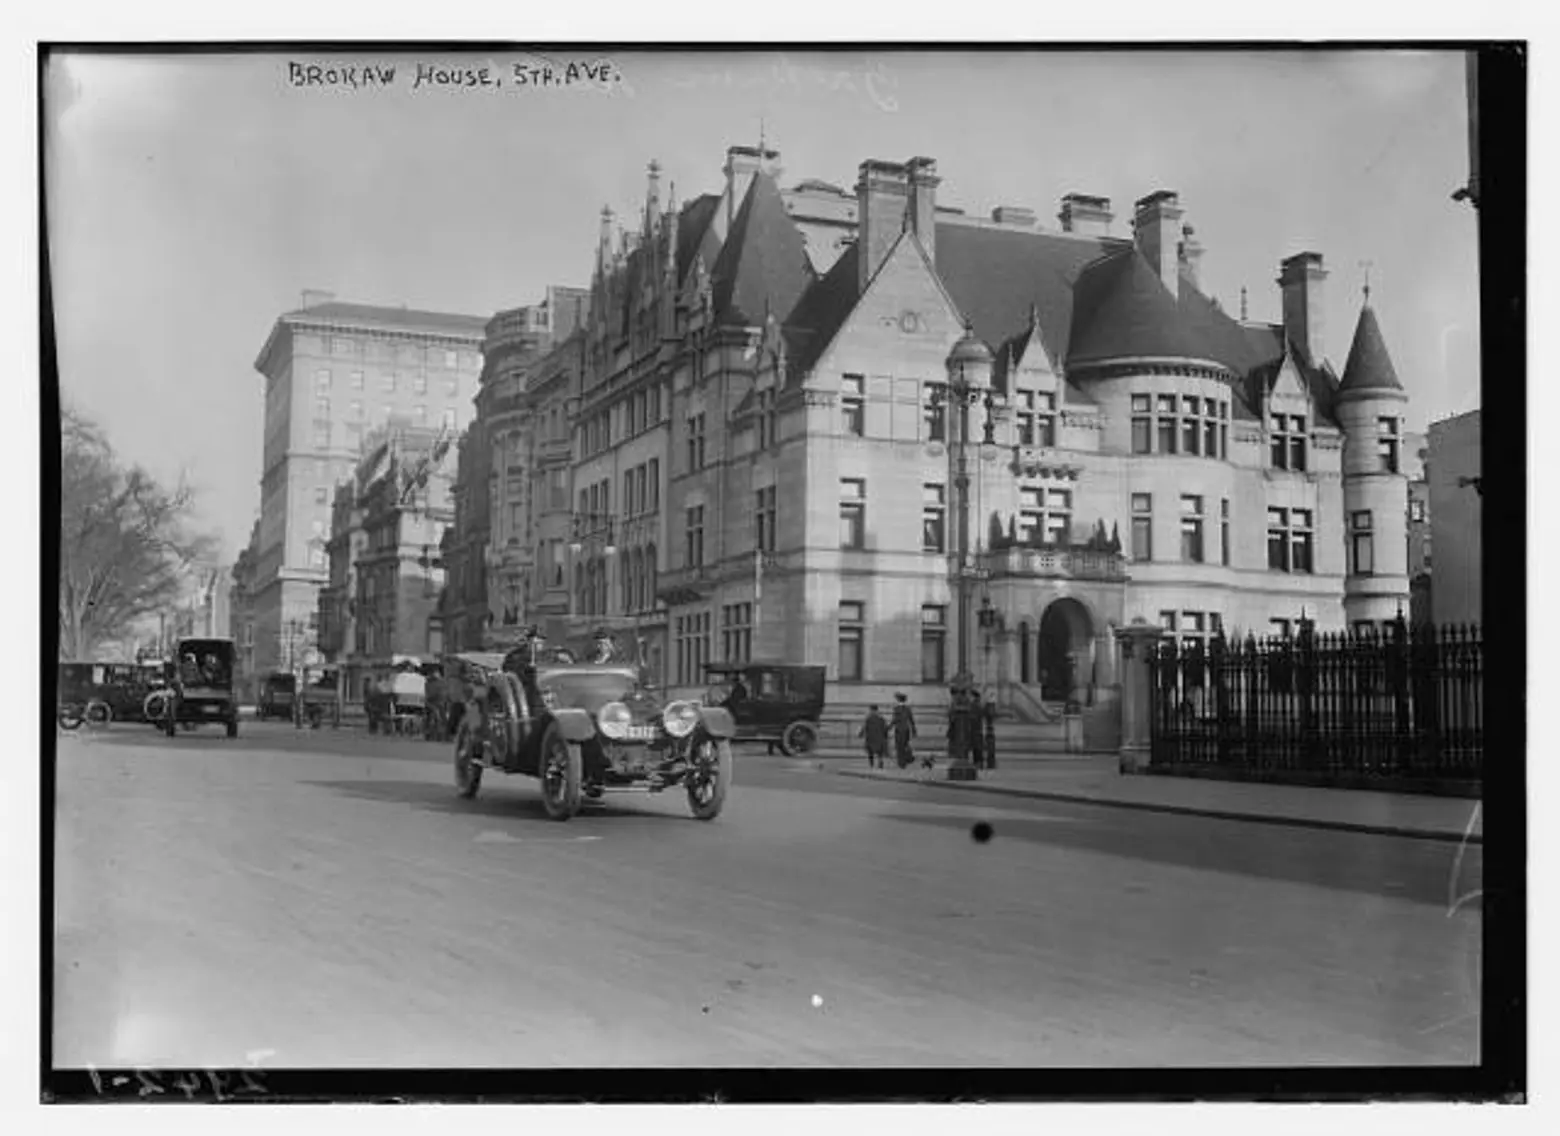 A guide to the Gilded Age mansions of 5th Avenue's millionaire row